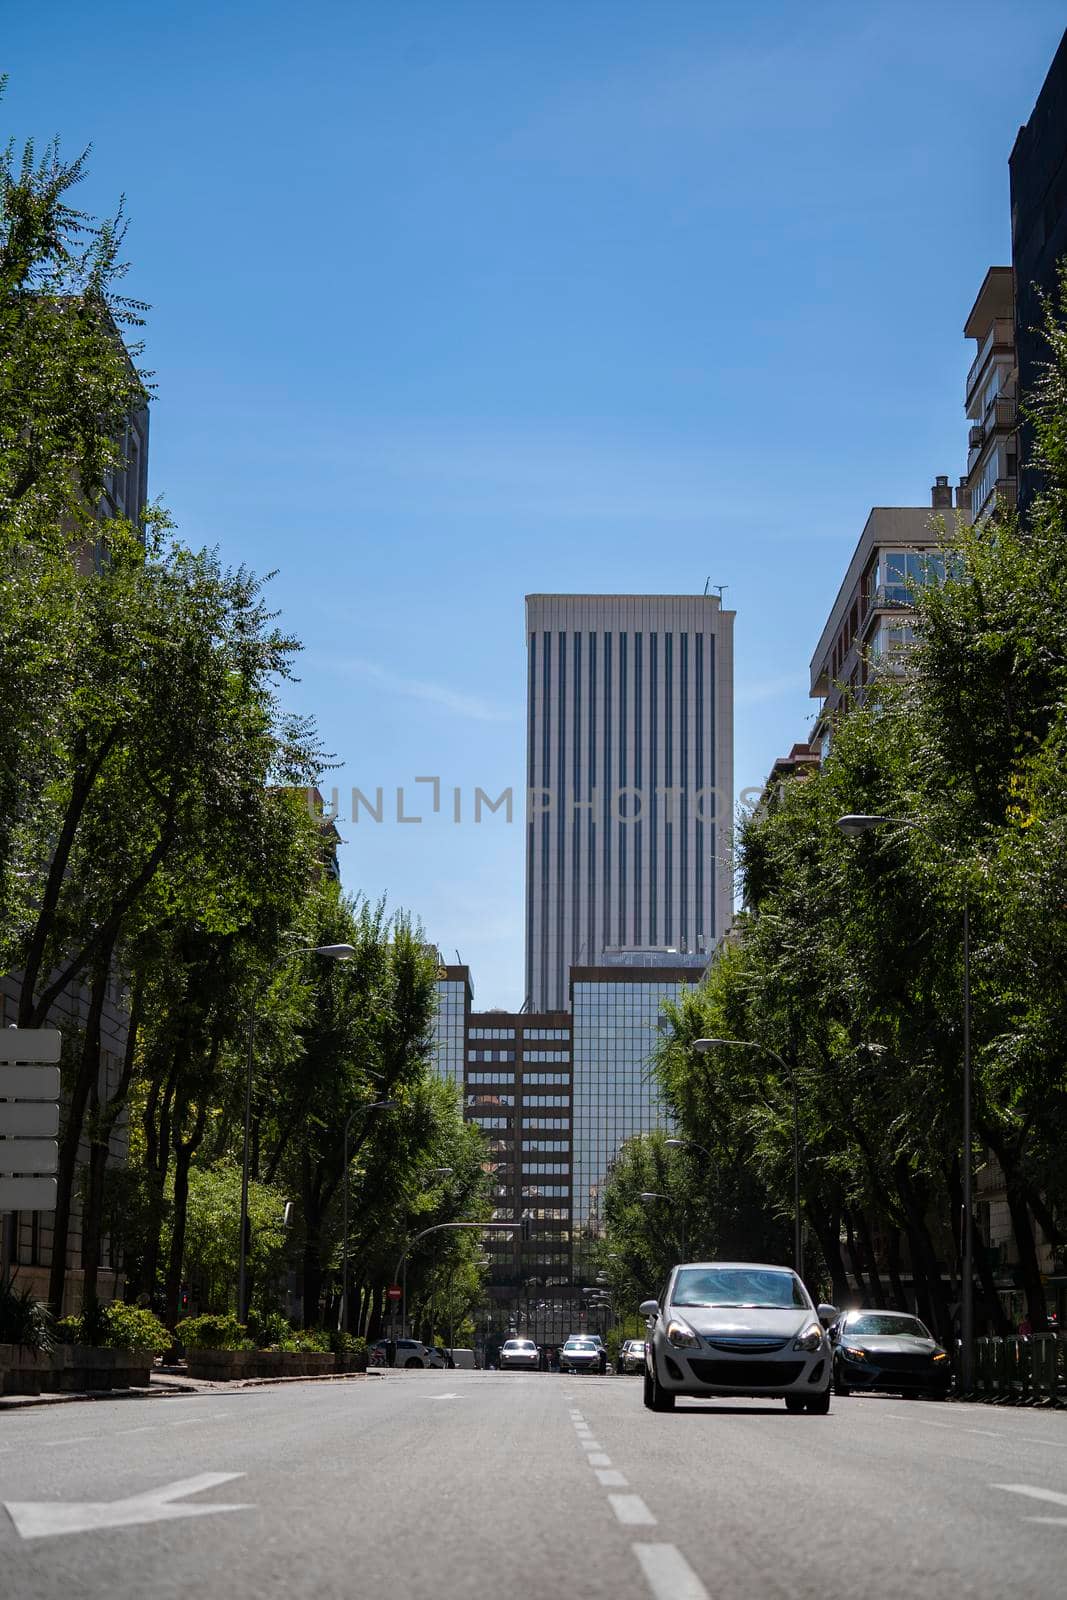 Sunny day in Madrid city downtown with business buildings and cars in the background. Road street shot by papatonic